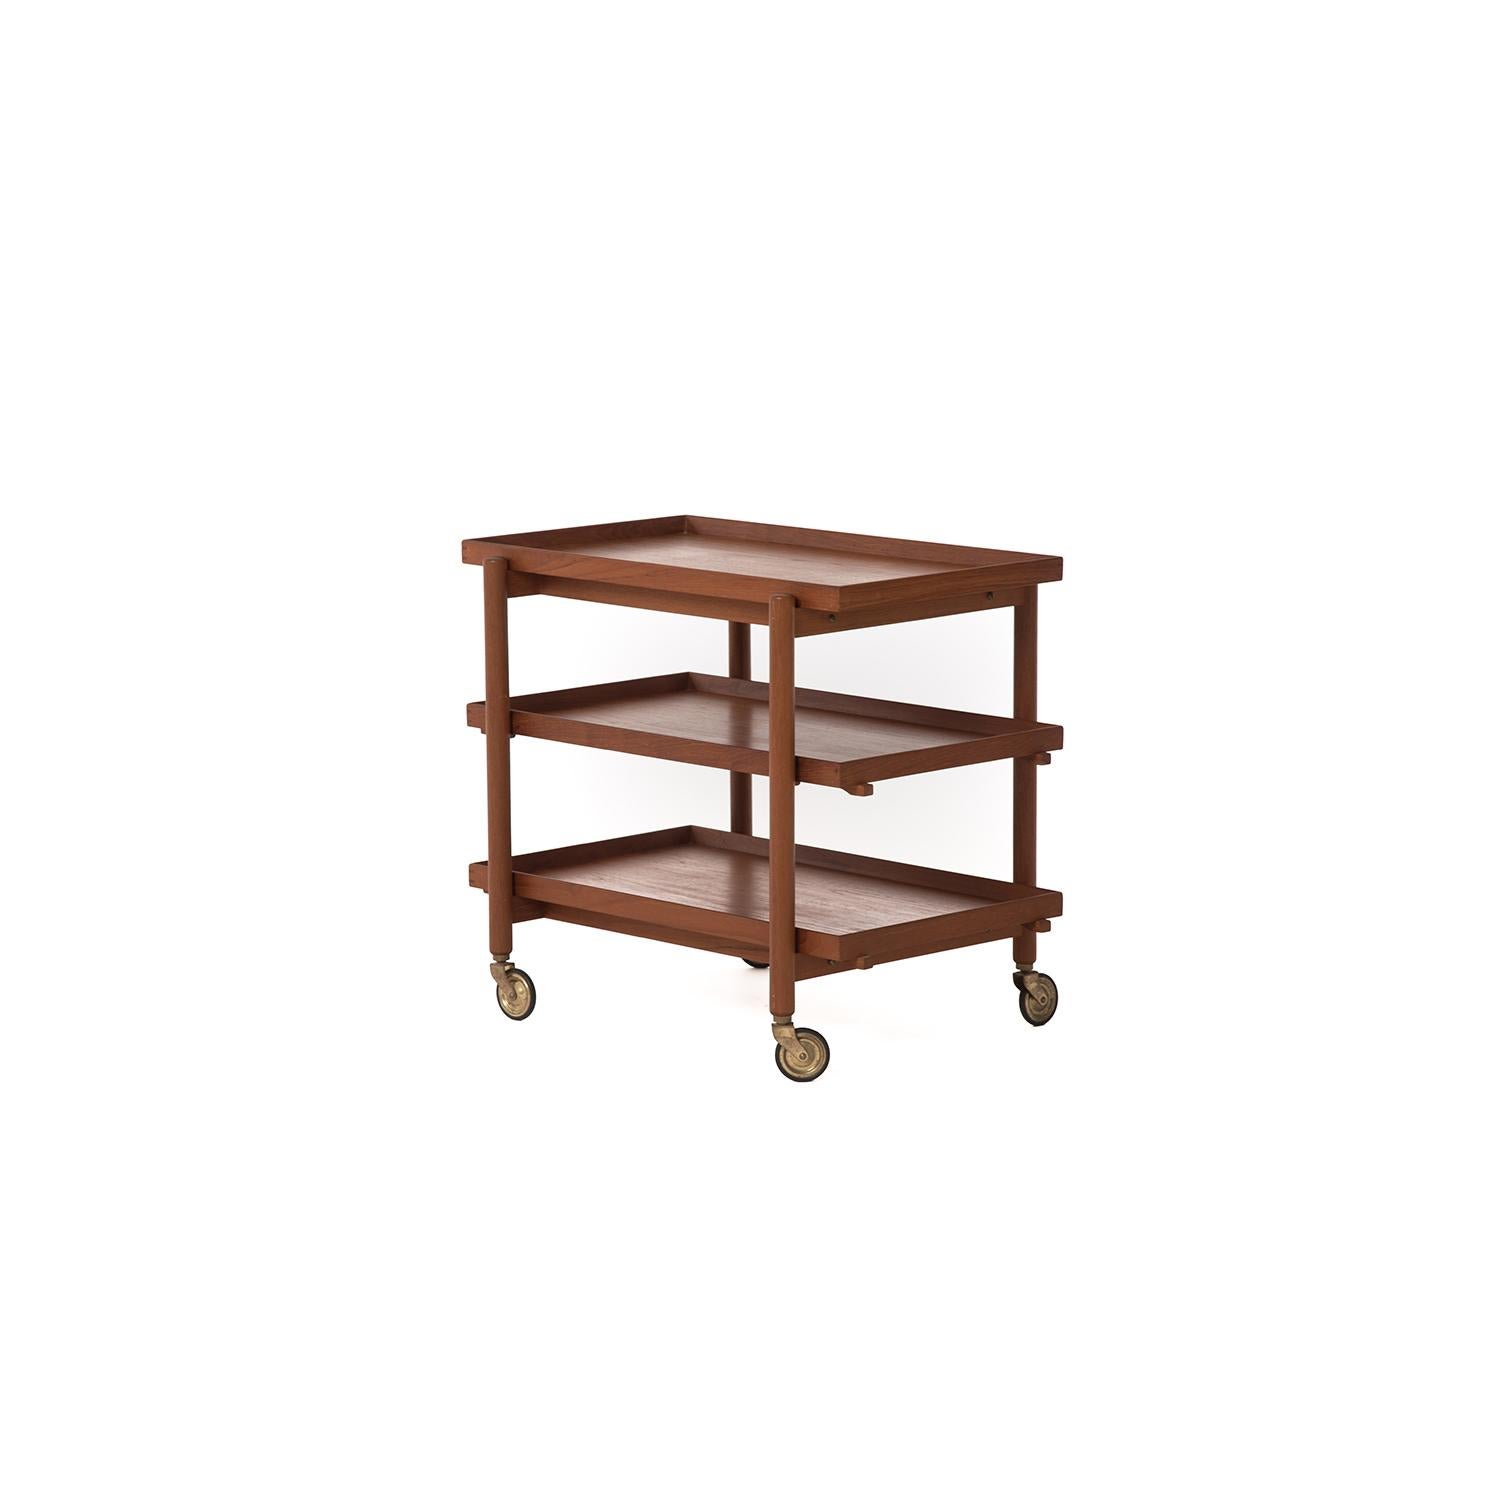 This Danish modern serving or bar cart by Poul Hundevad is made from old growth teak and finished traditionally with oil. The three-tiered design allows for multiple storage options, the middle and bottom shelves can double as serving trays. The